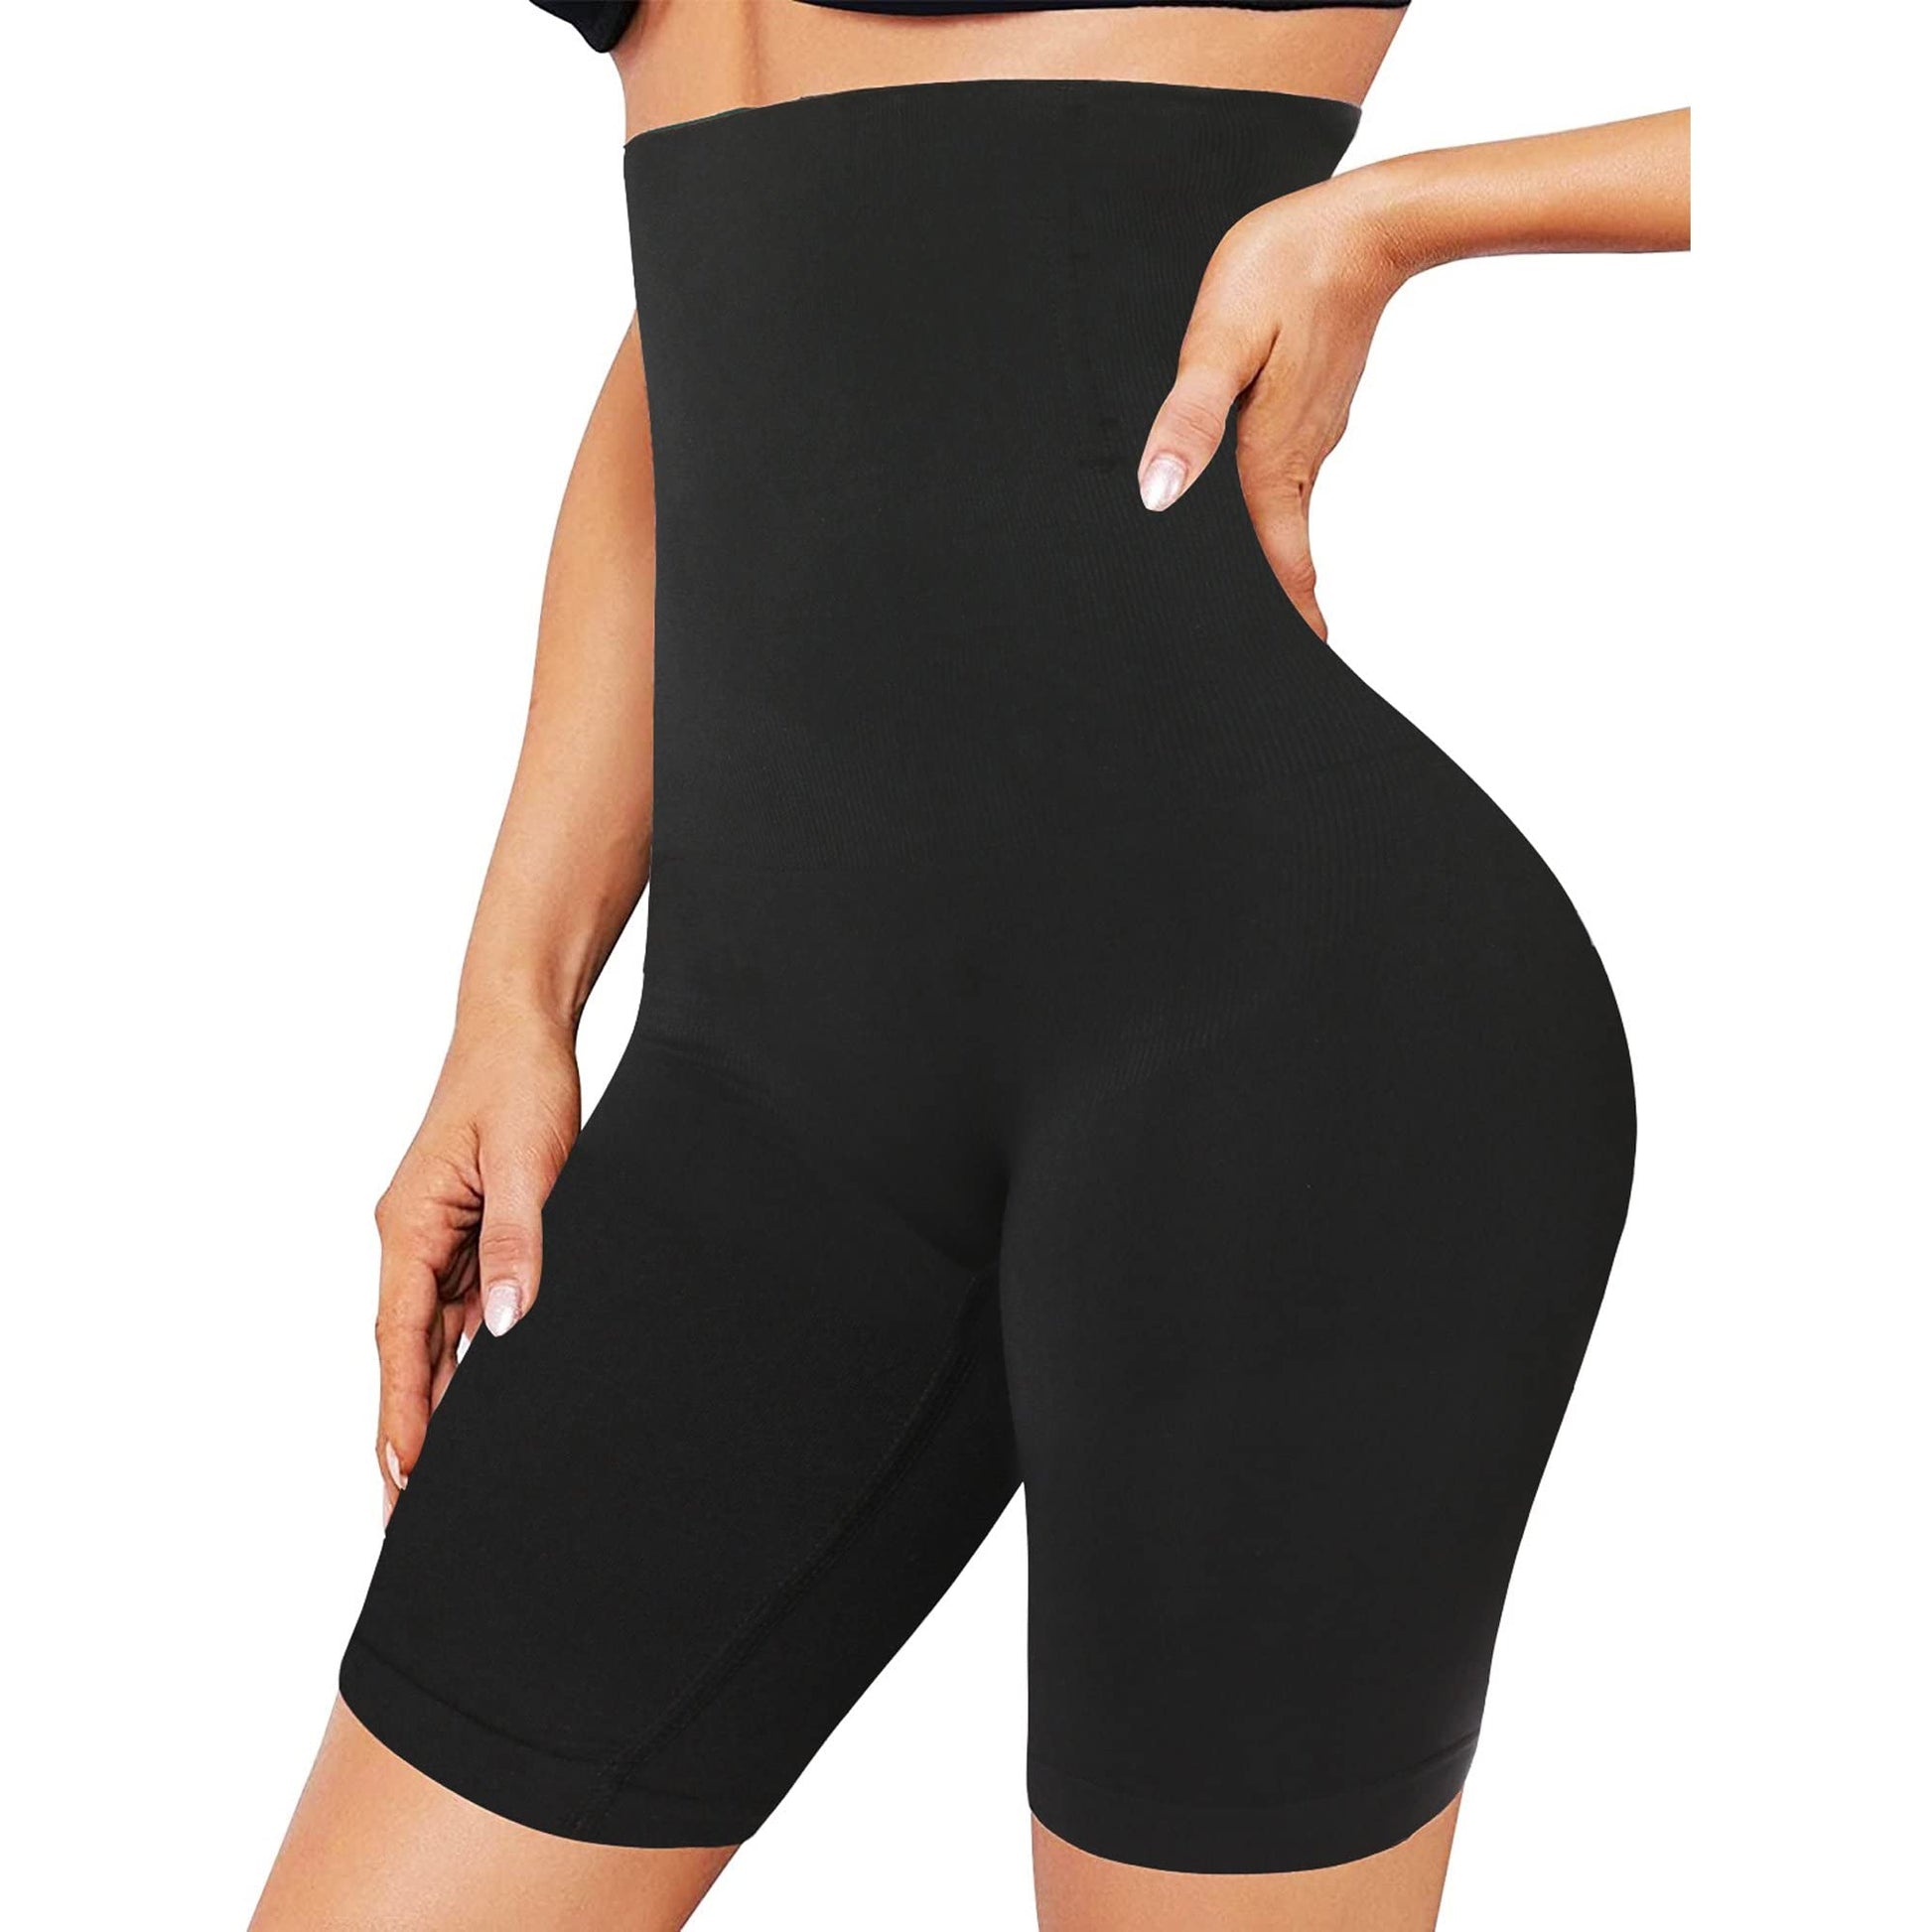 Shop Slim Fit Tummy Control Pants with great discounts and prices